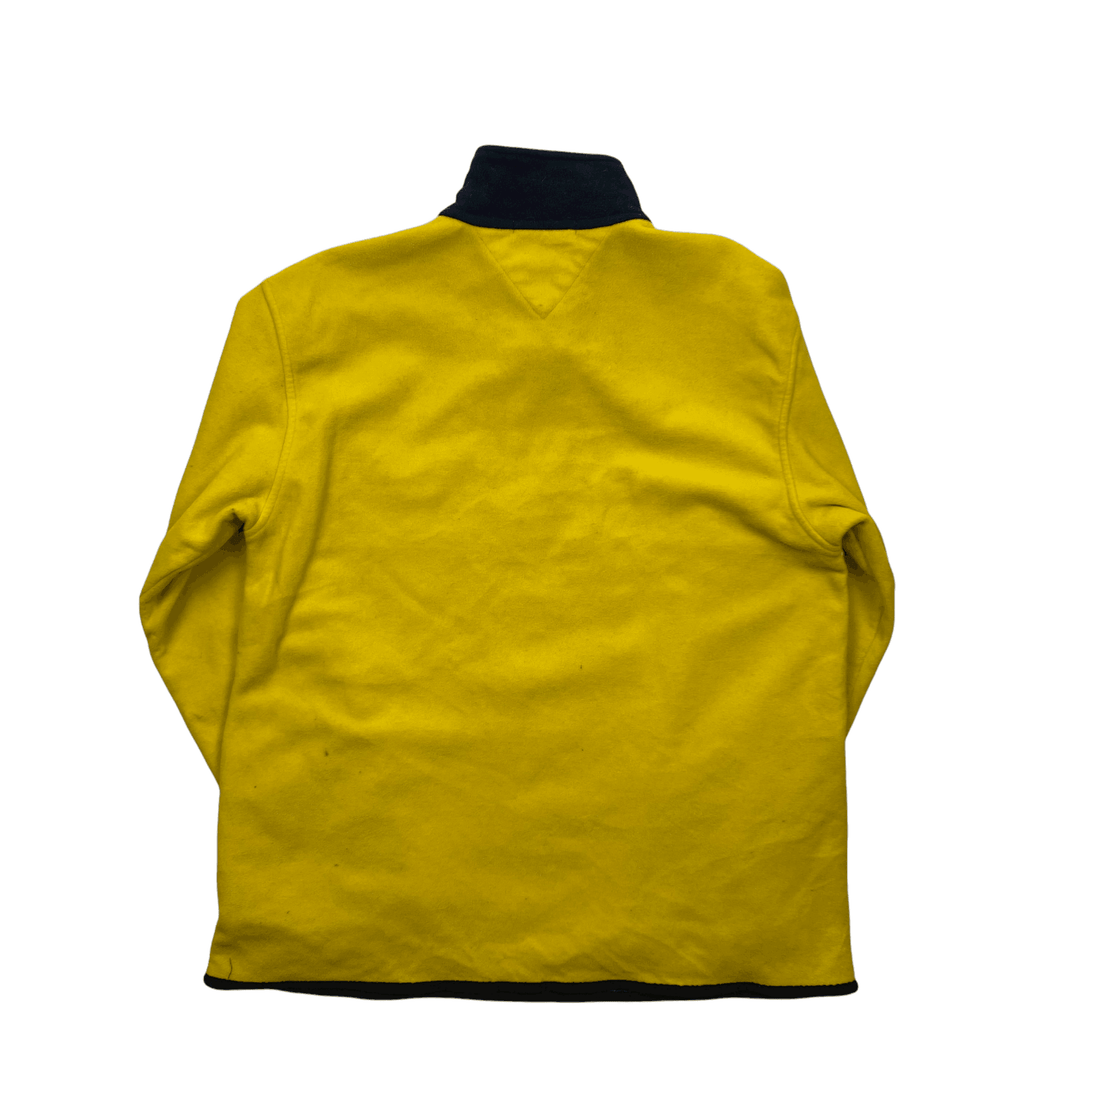 Vintage 90s Yellow + White Tommy Hilfiger Spell-Out Quarter Zip Fleece - Large - The Streetwear Studio